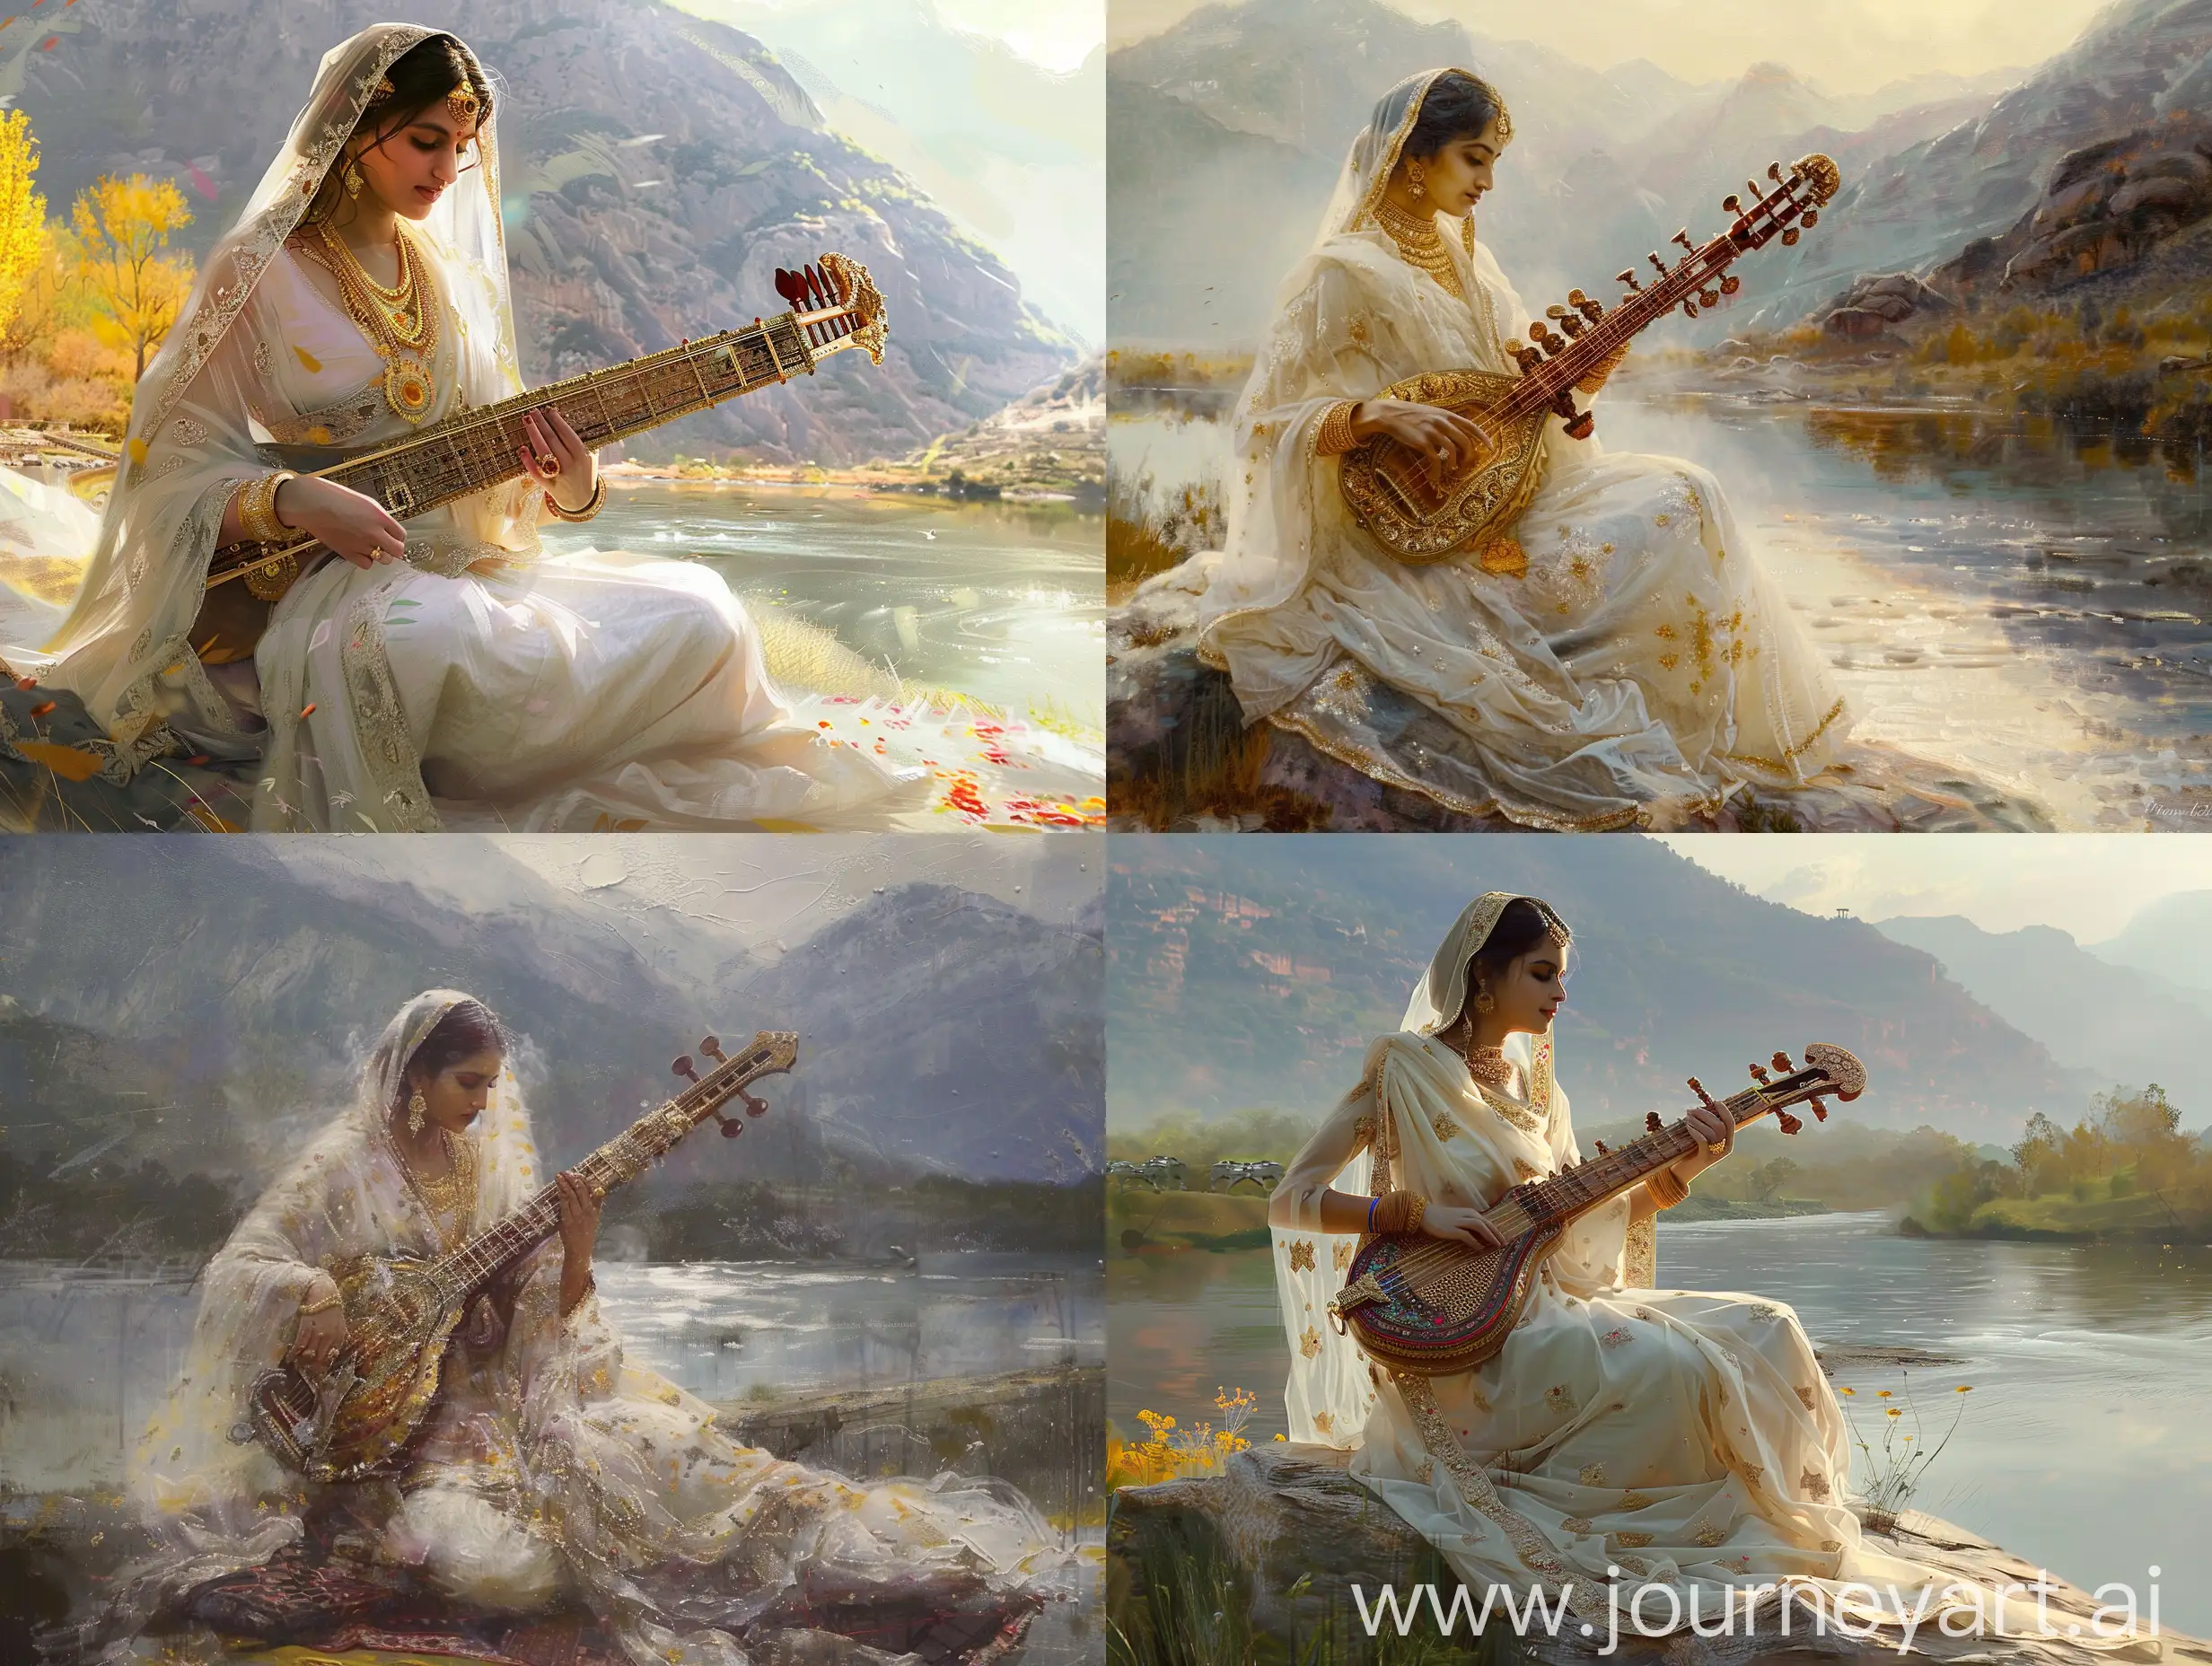 Impressionist image of a lady dressed in white sari and beautiful gold ornaments playing sitar, saffron midst of early morning, riverside, mountains in background, breathtaking surreal visualization